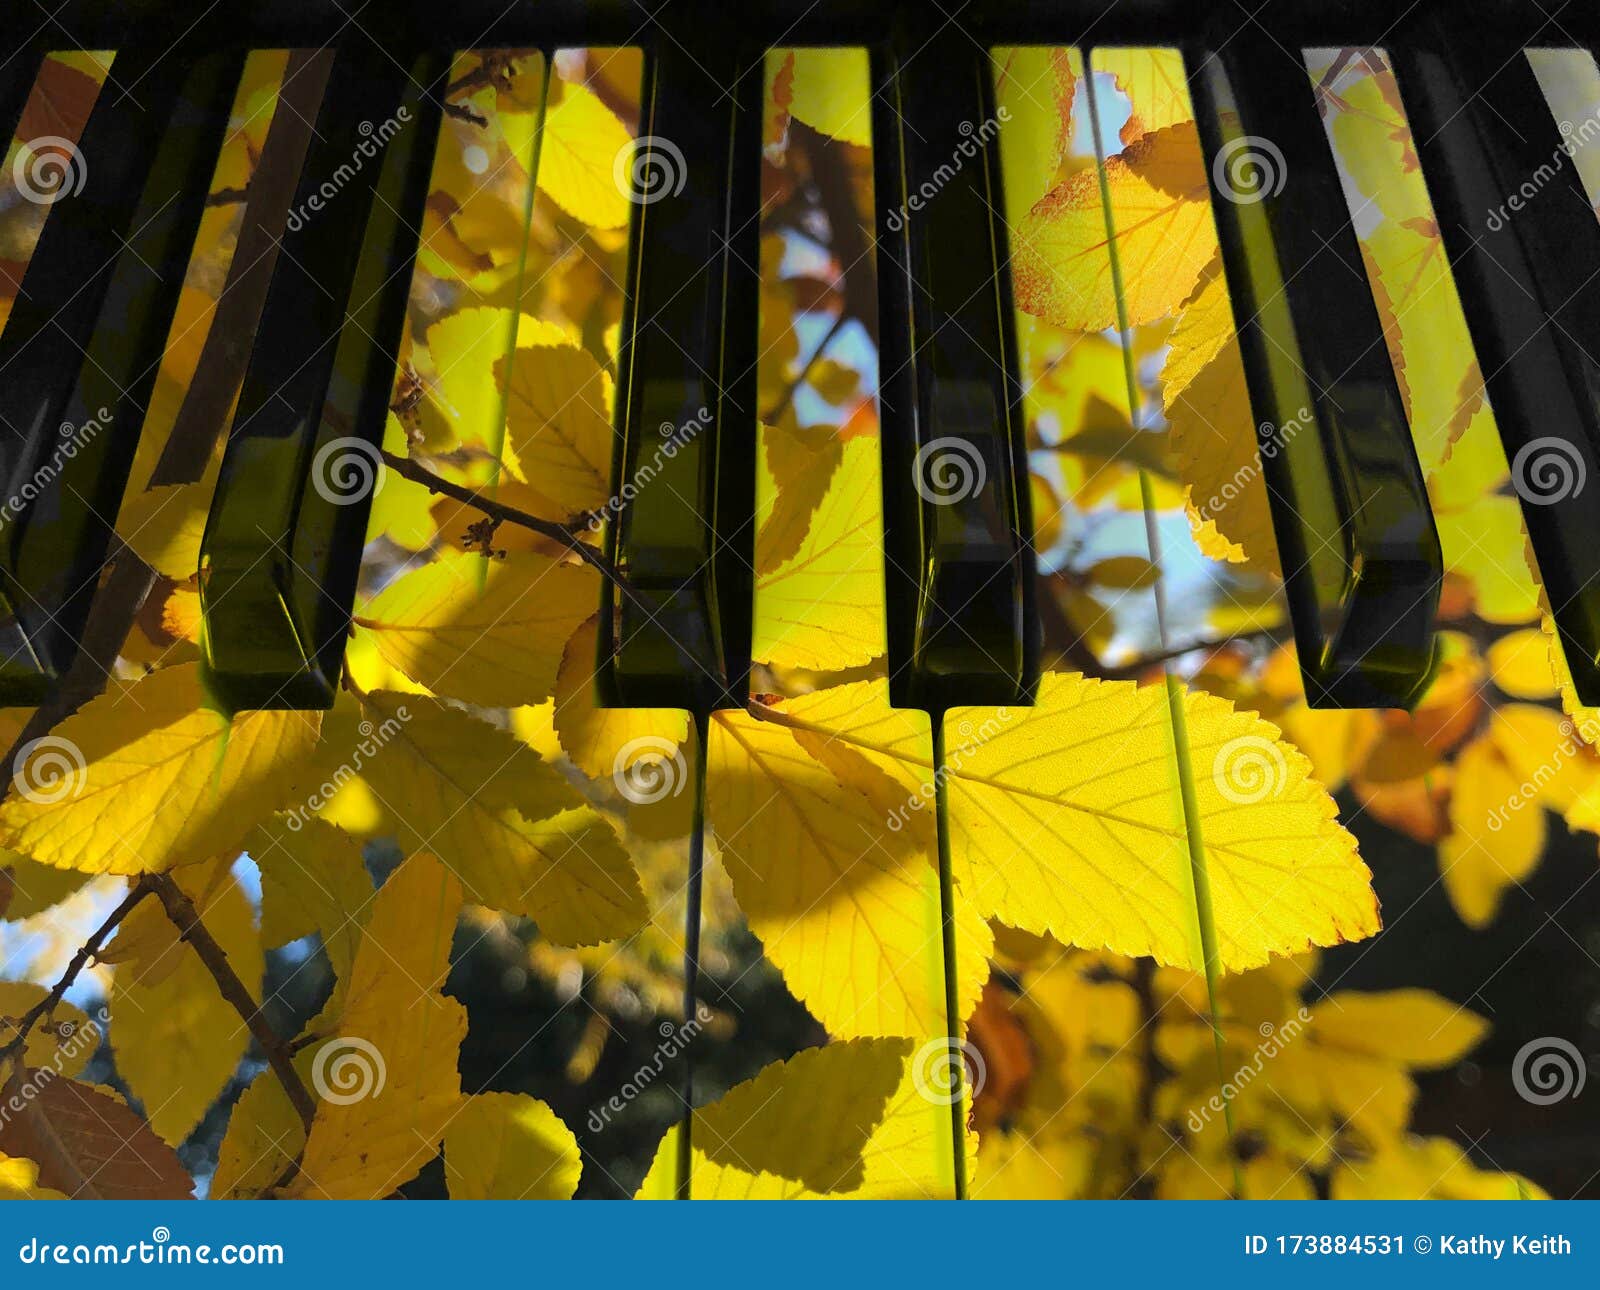 double exposure effect with keyoard keys closeup and yellow leaves backlit by the sun